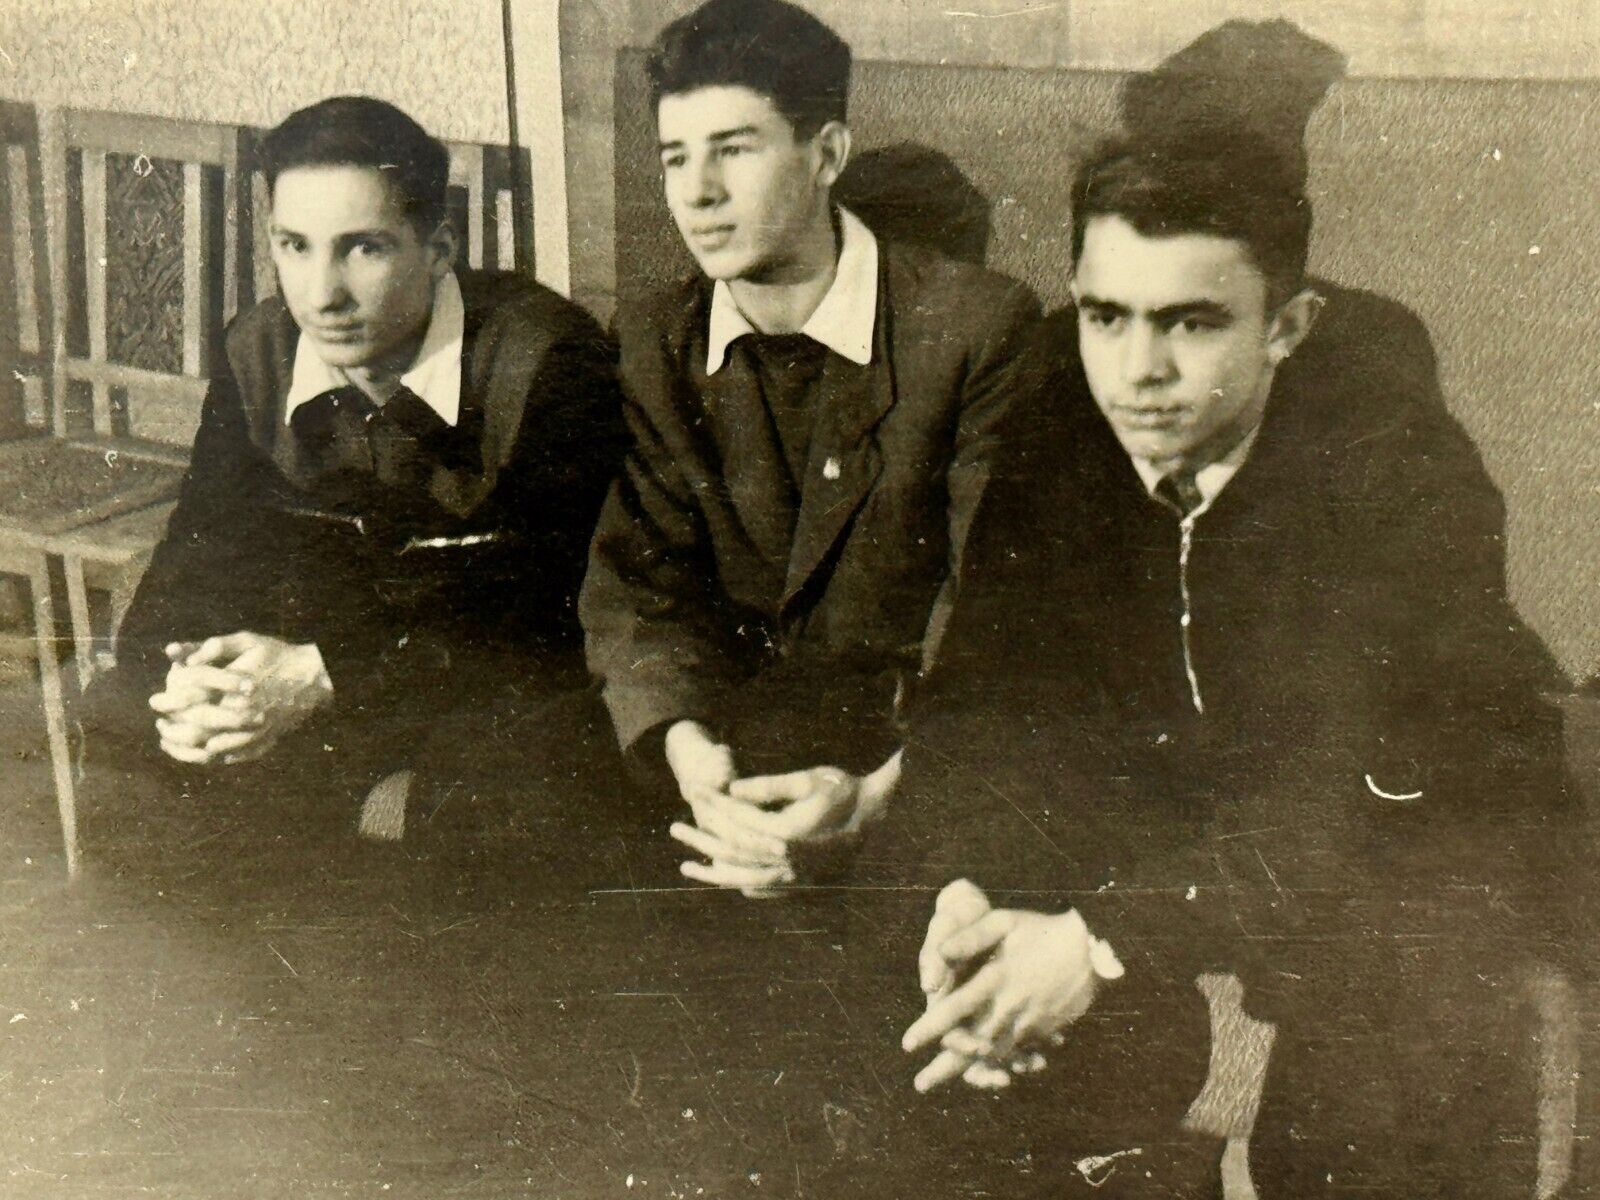 1960s Three Handsome Guys Young Men Lovely Students Gay Int B&W Photo Snapshot